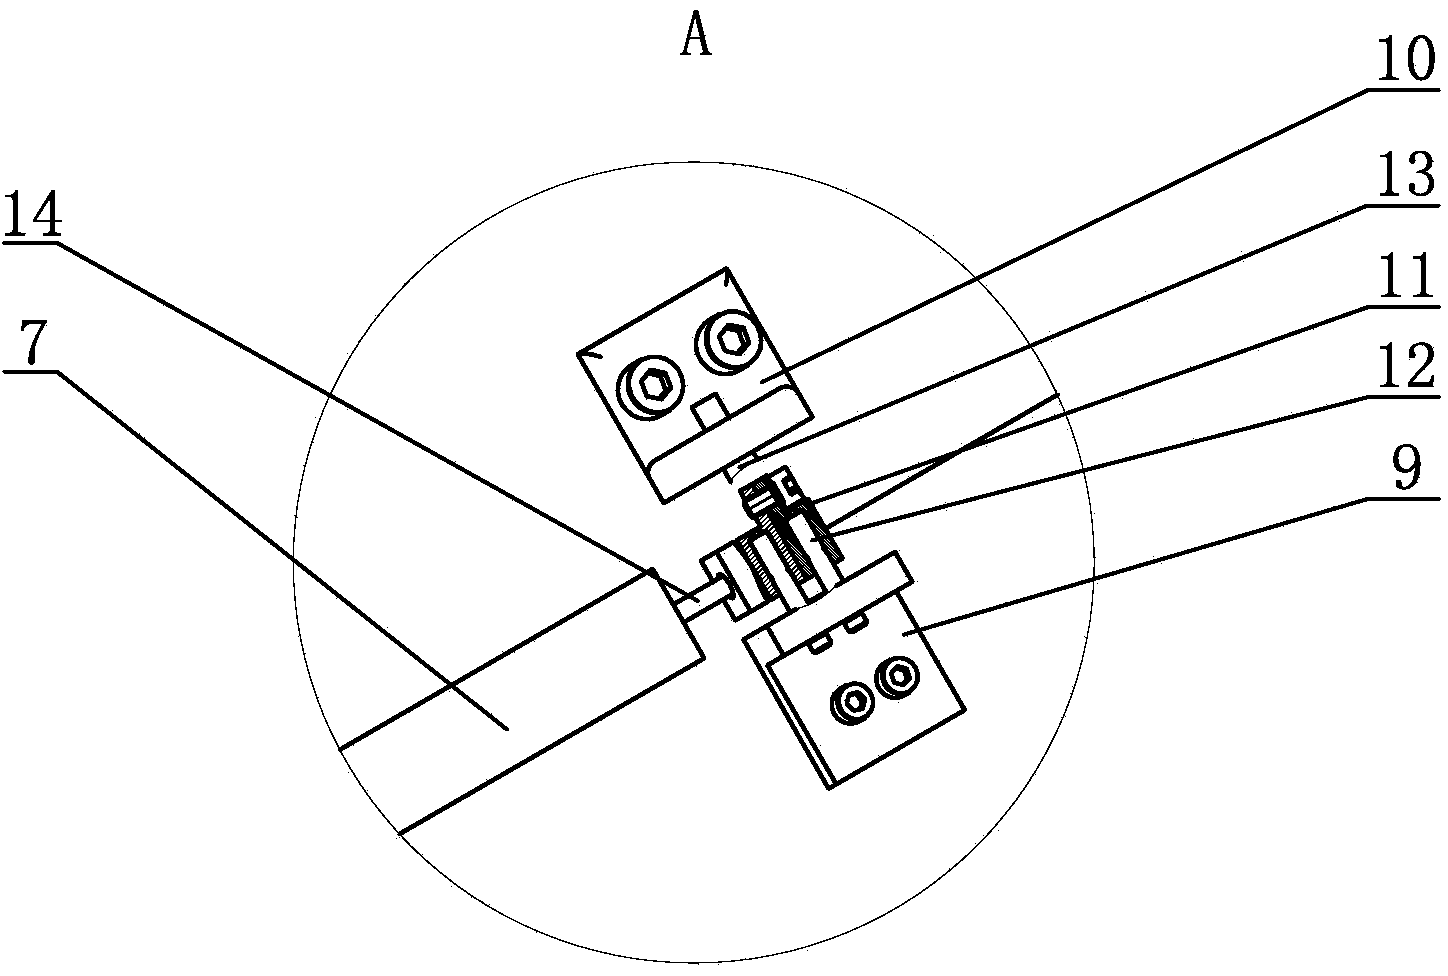 Sunflower type solid antenna capable of being spread